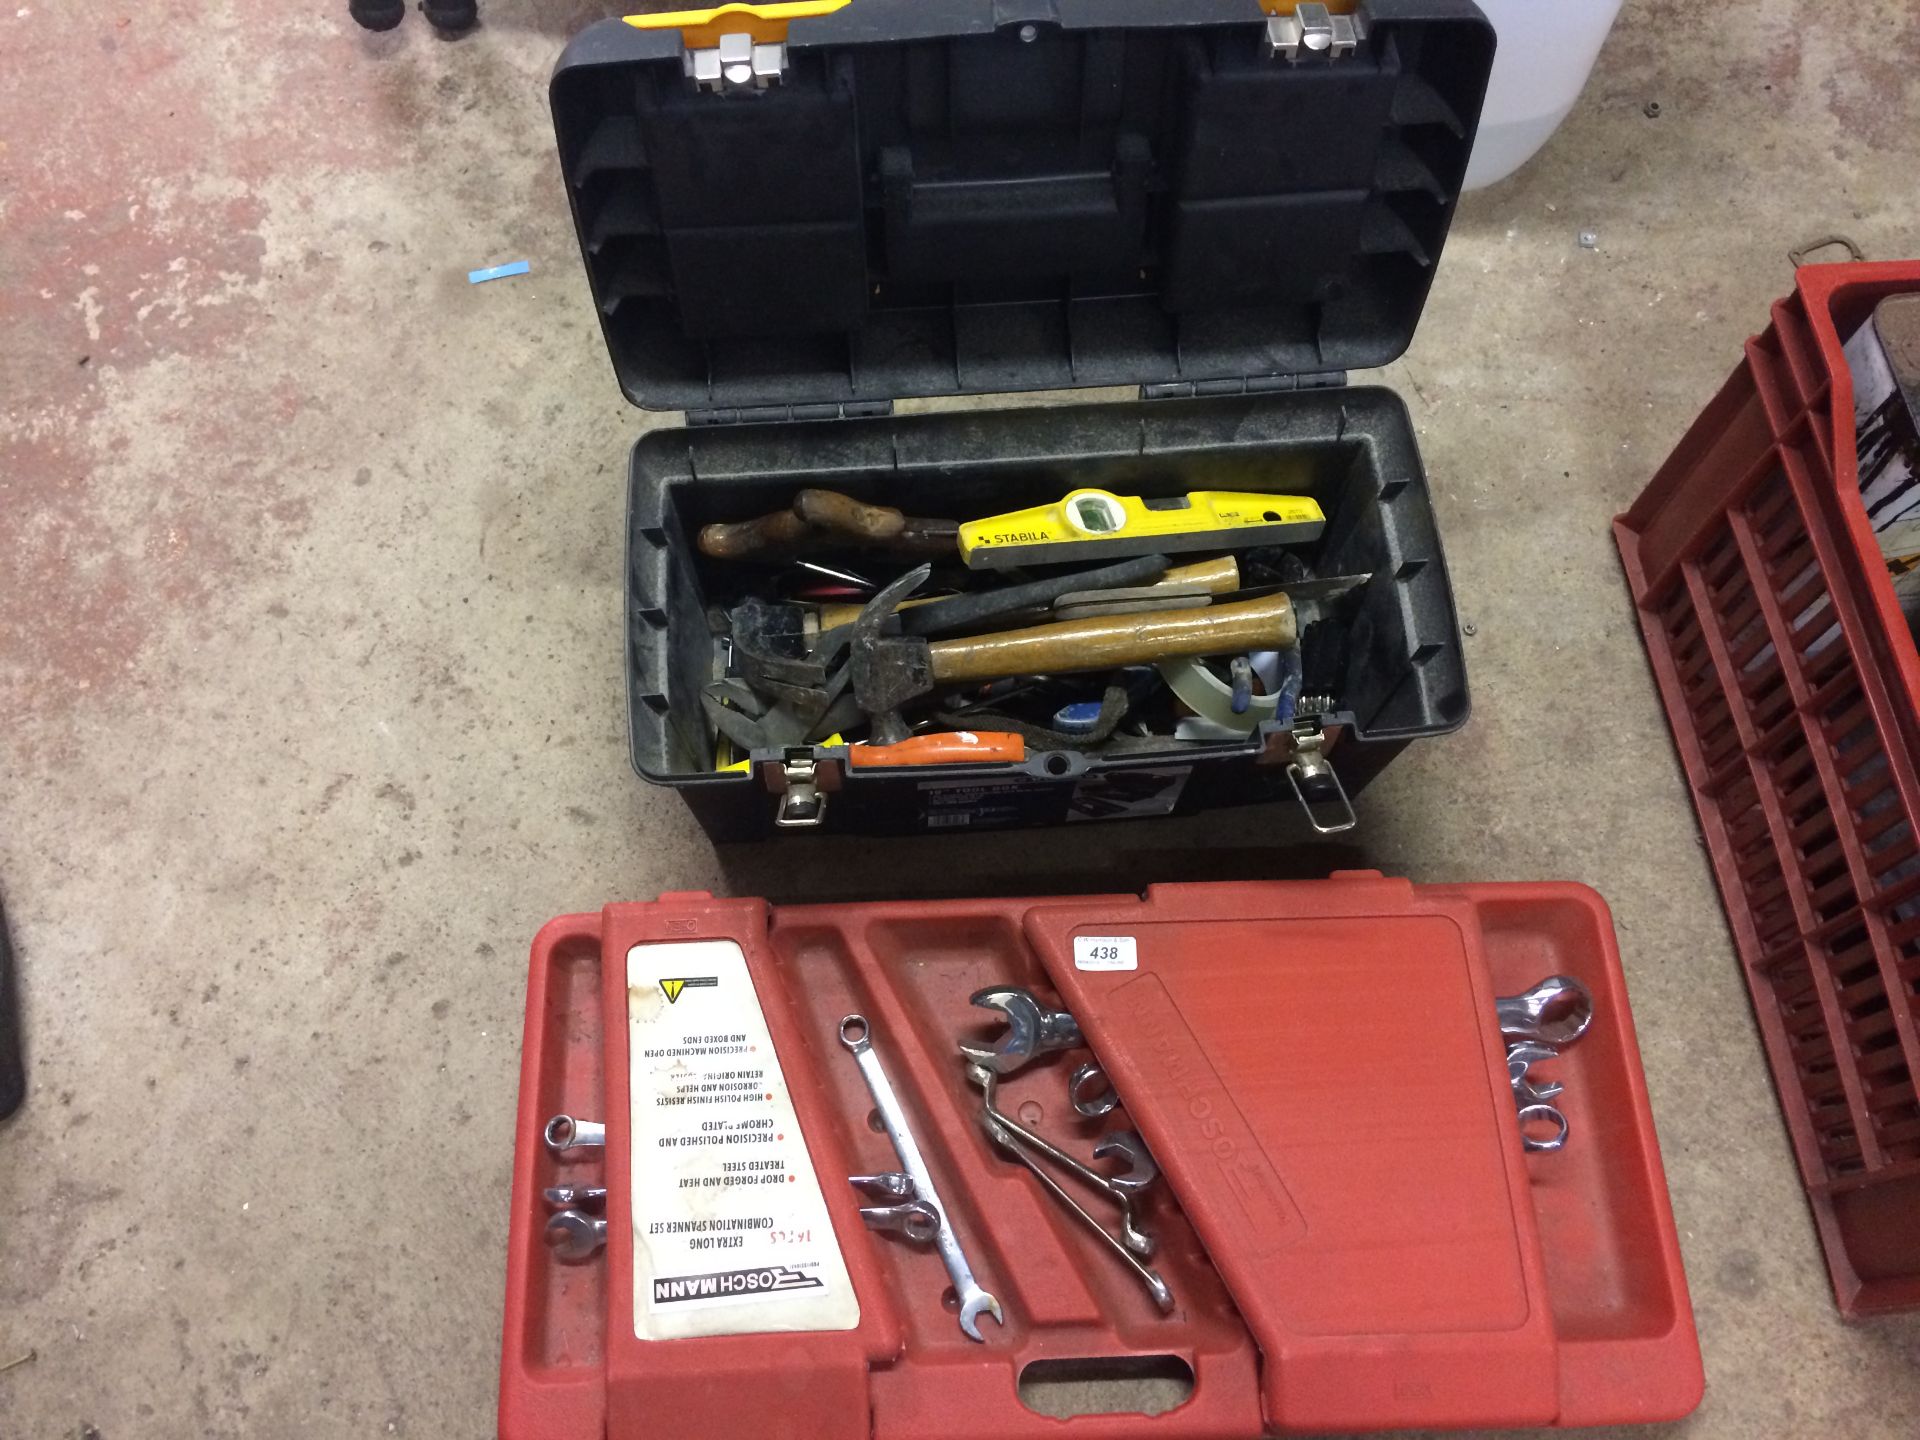 A Wickes tool box and contents - hammer, wood saw, - Image 2 of 2